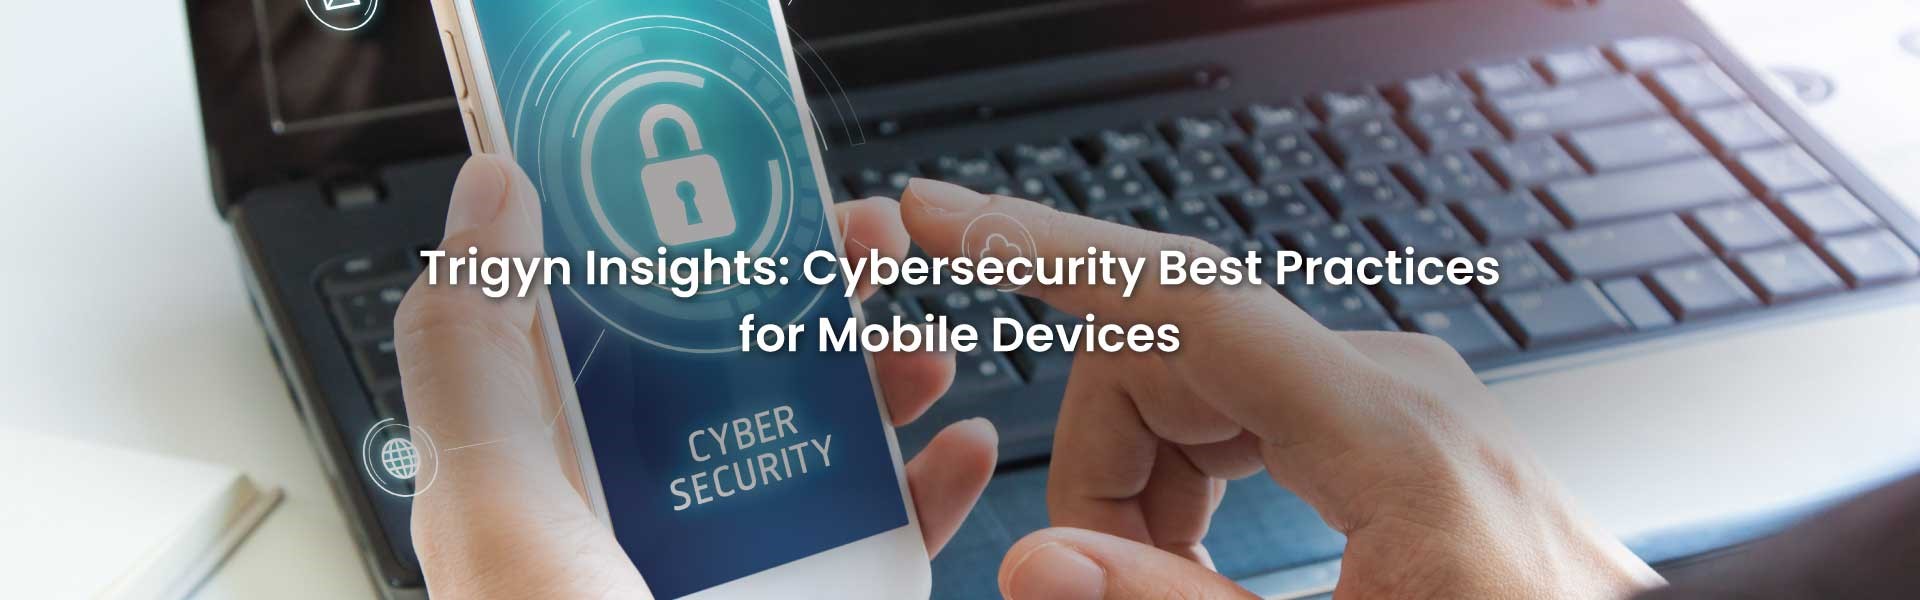 Cybersecurity Practices for Mobile Devices